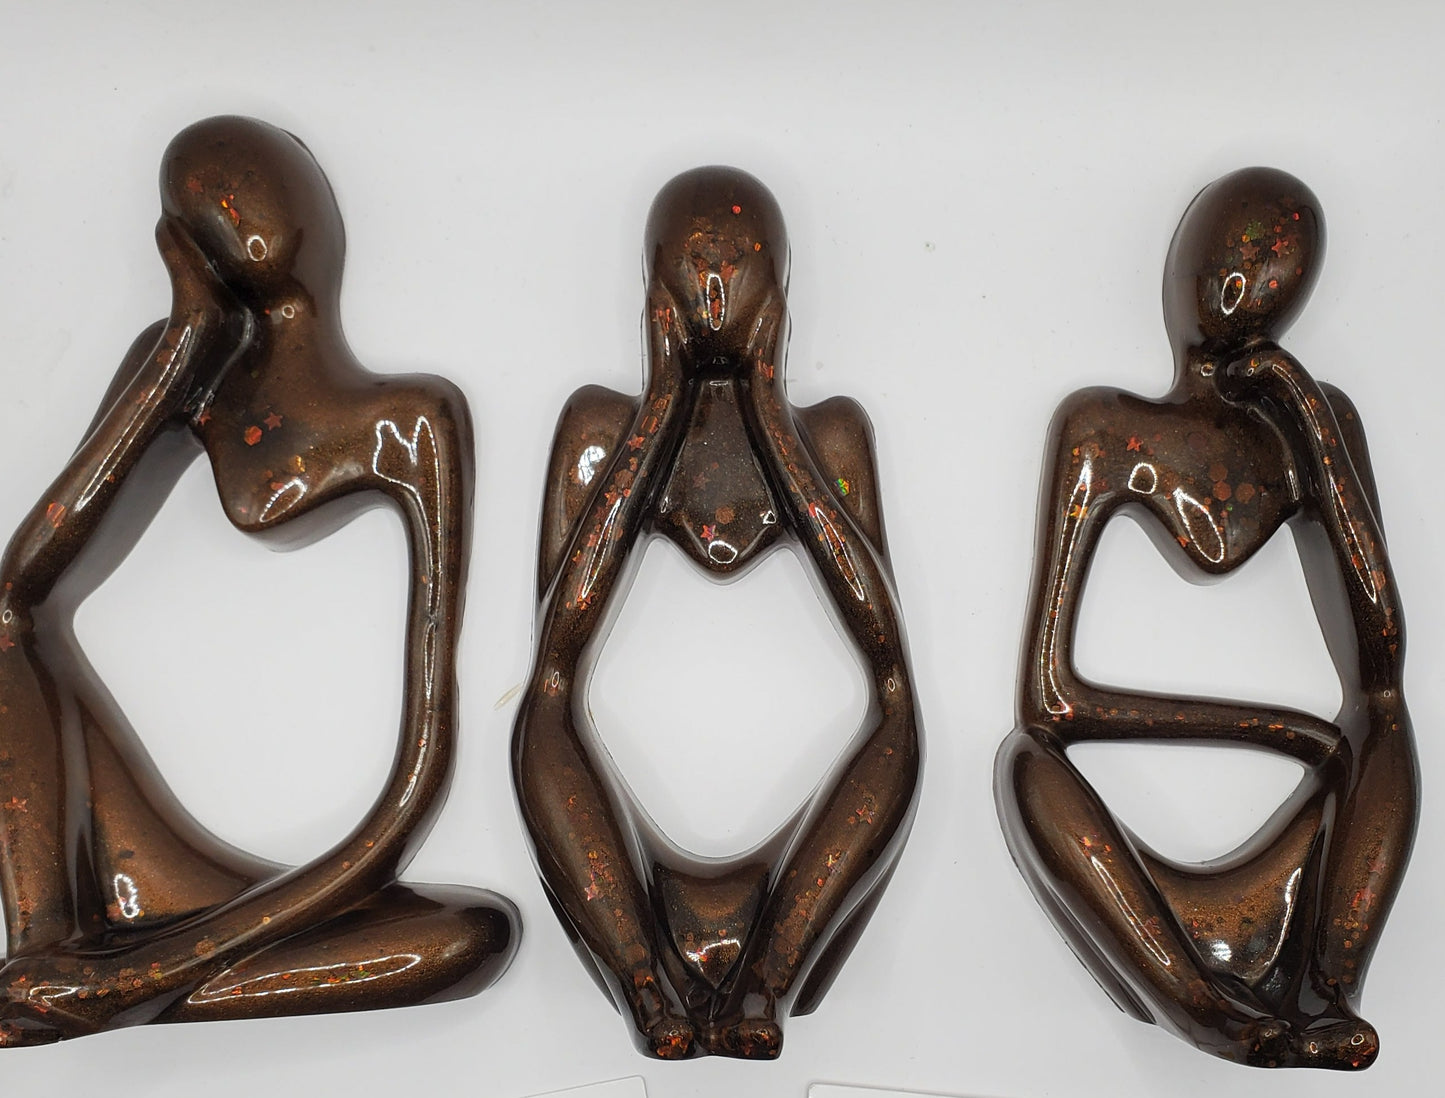 Three statues adding a touch of sophistication to any space. Perfect home decor thinker statues.